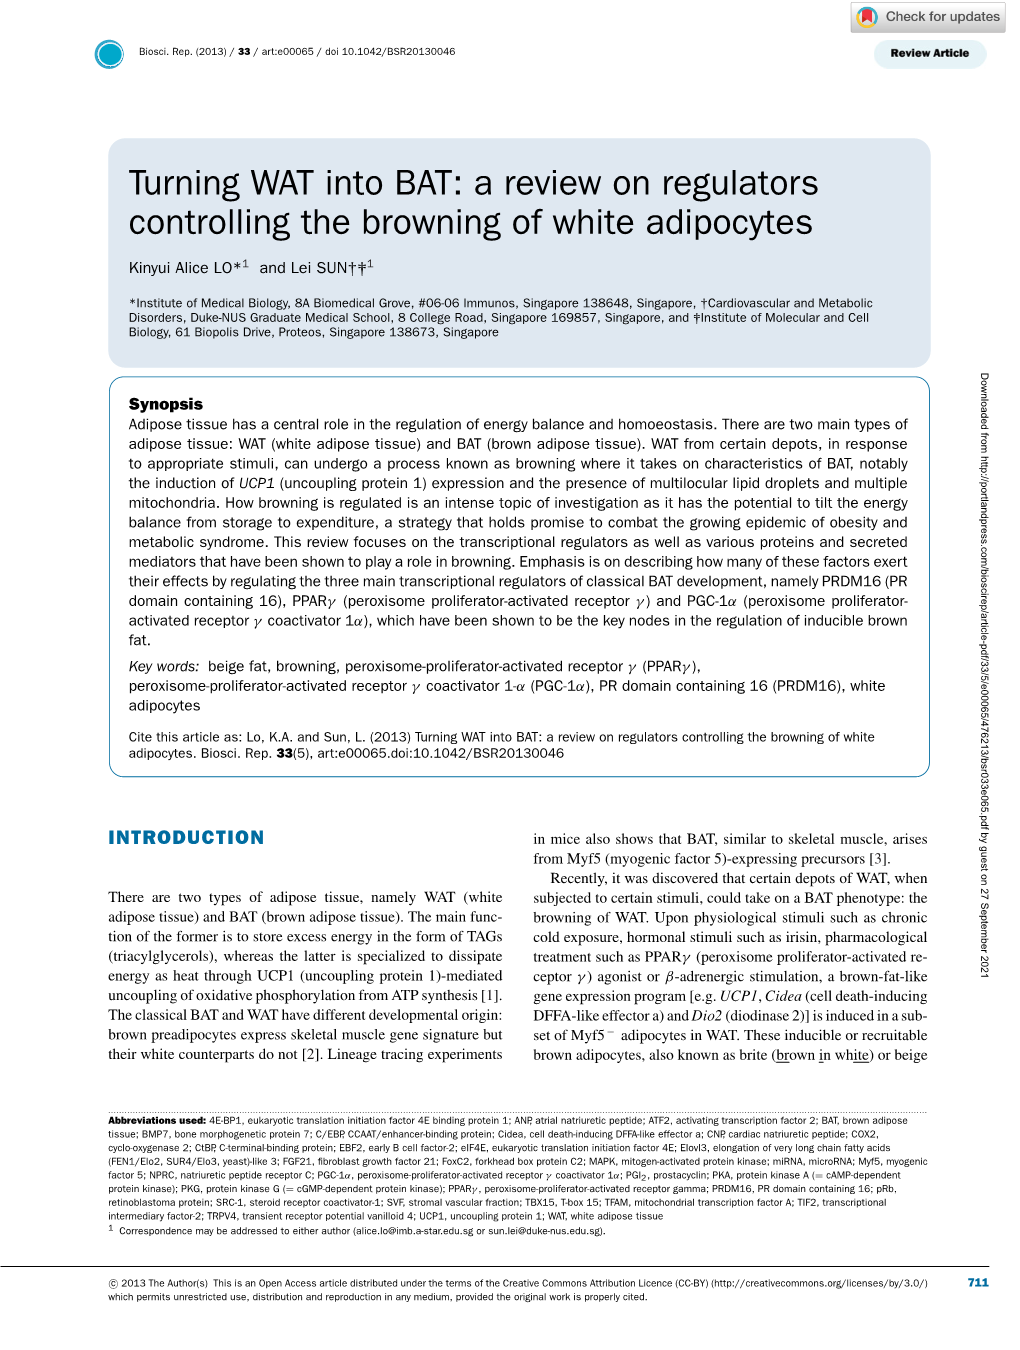 A Review on Regulators Controlling the Browning of White Adipocytes